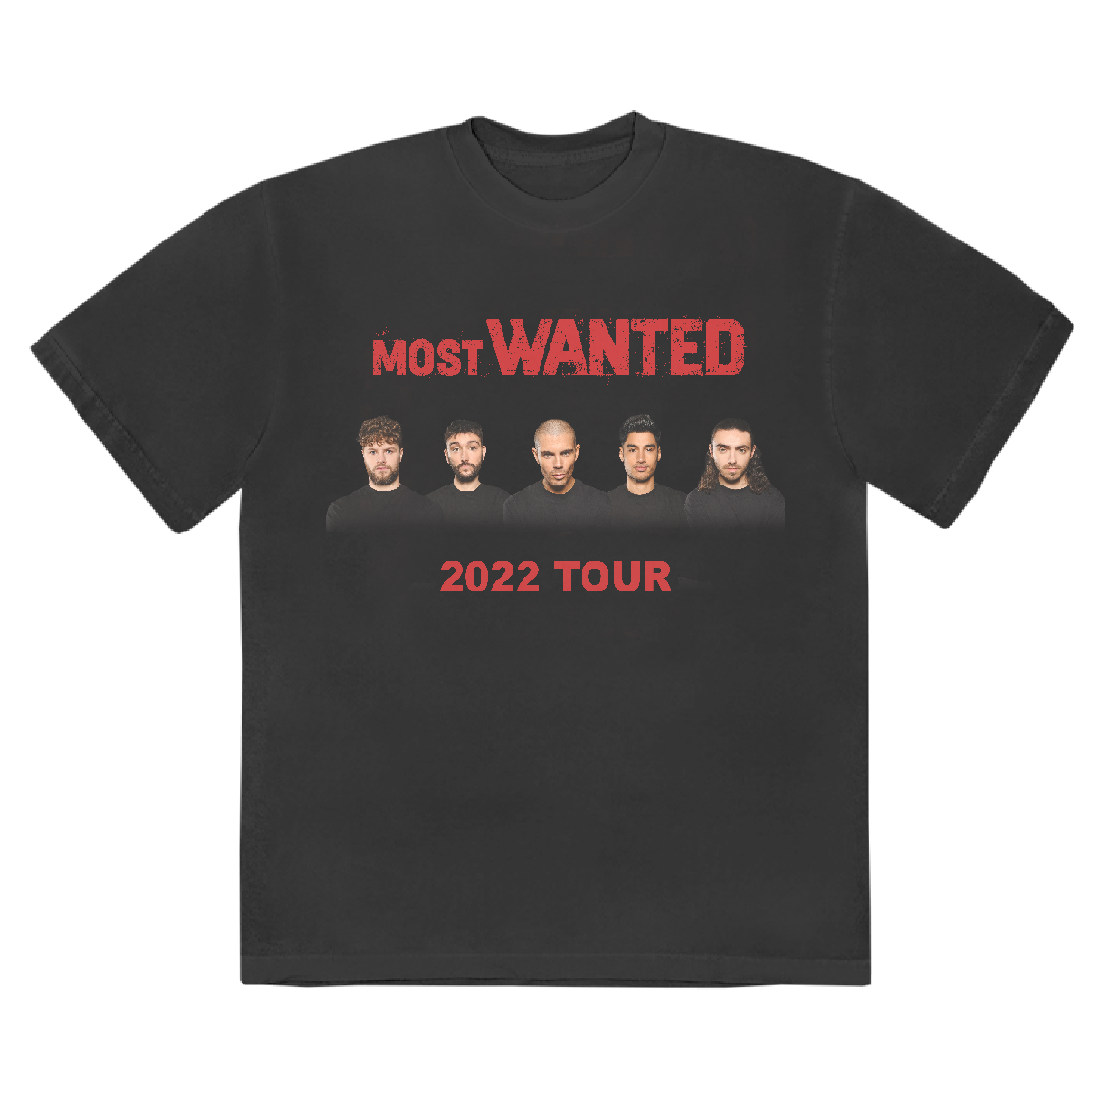 The Wanted - Most Wanted 2022 Tour T-Shirt